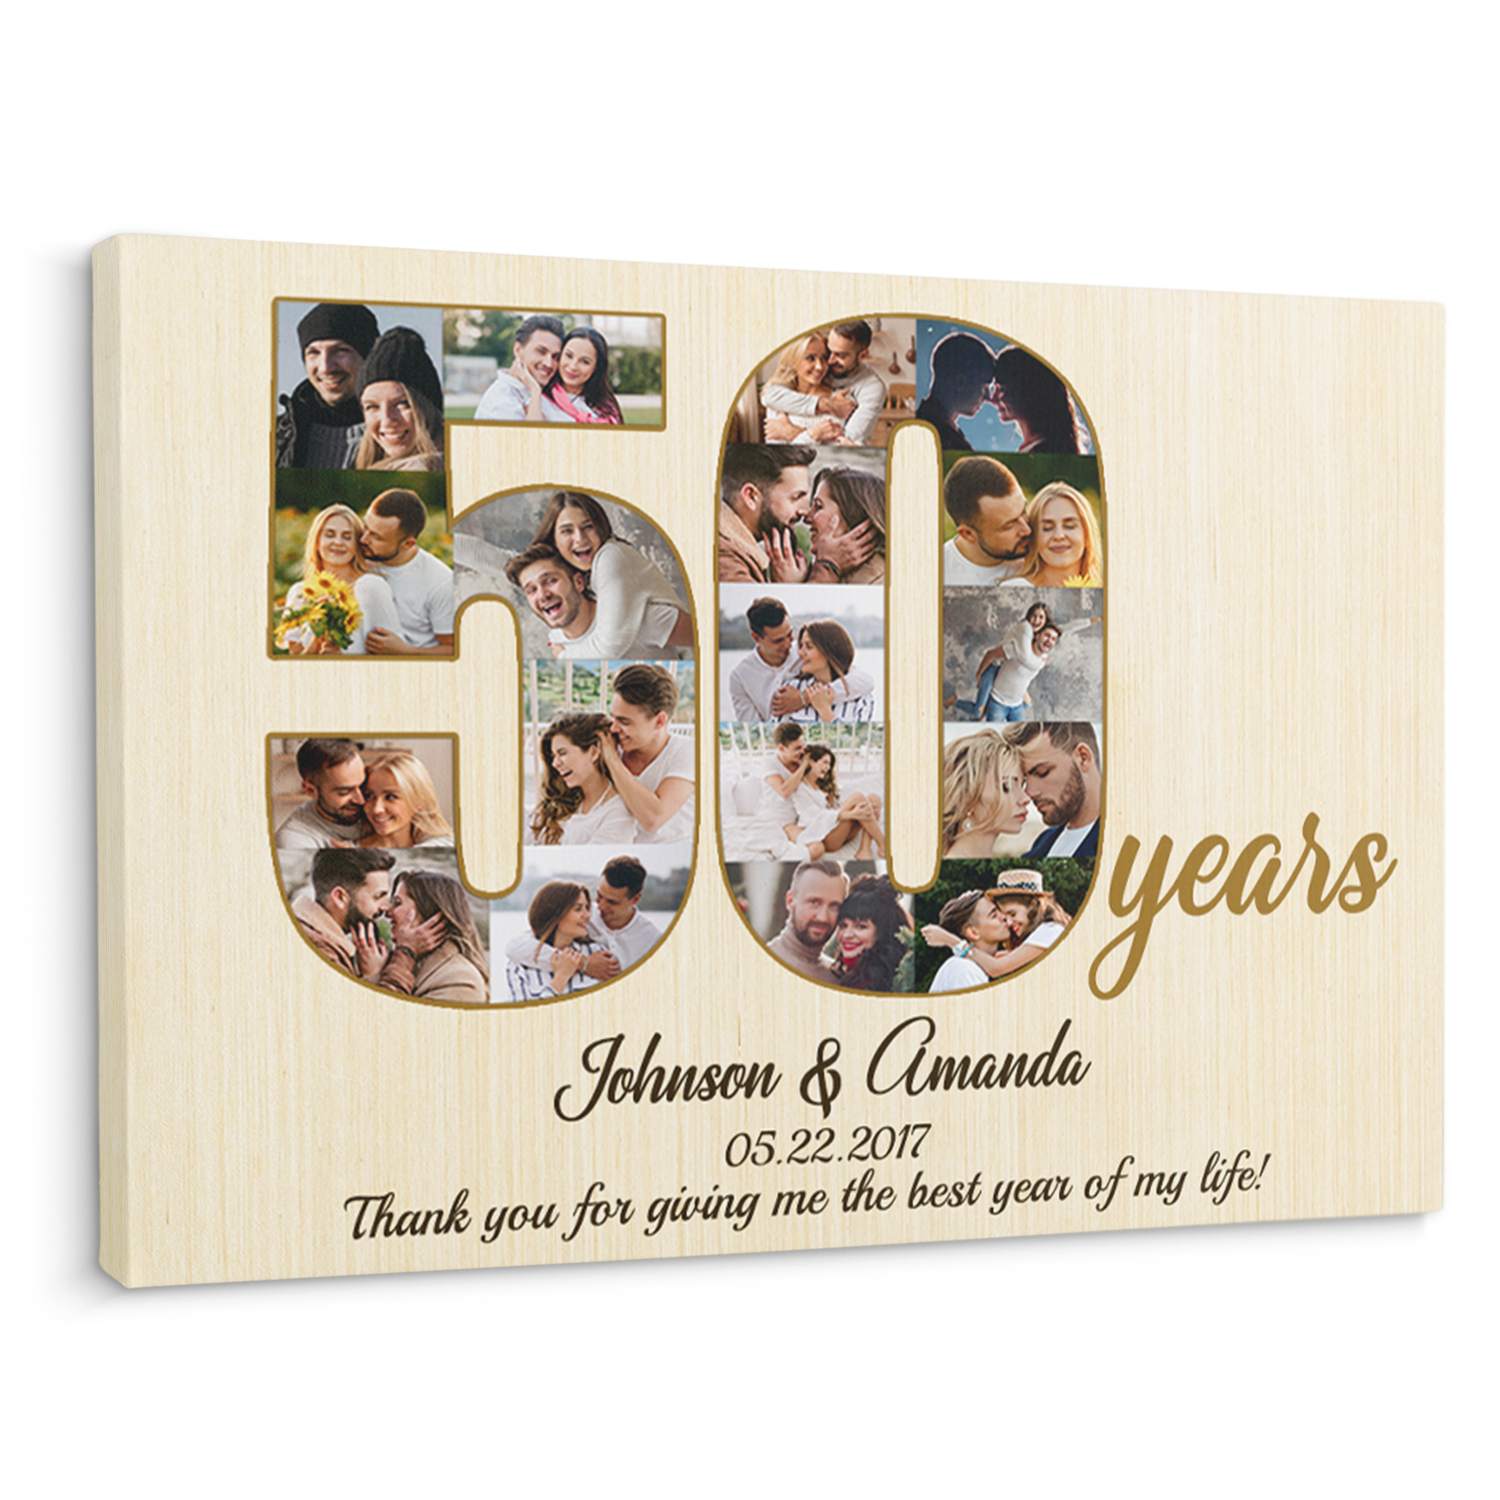 Personalised 60th Wedding Anniversary Gift For Grandparents –  CollagemasterCo